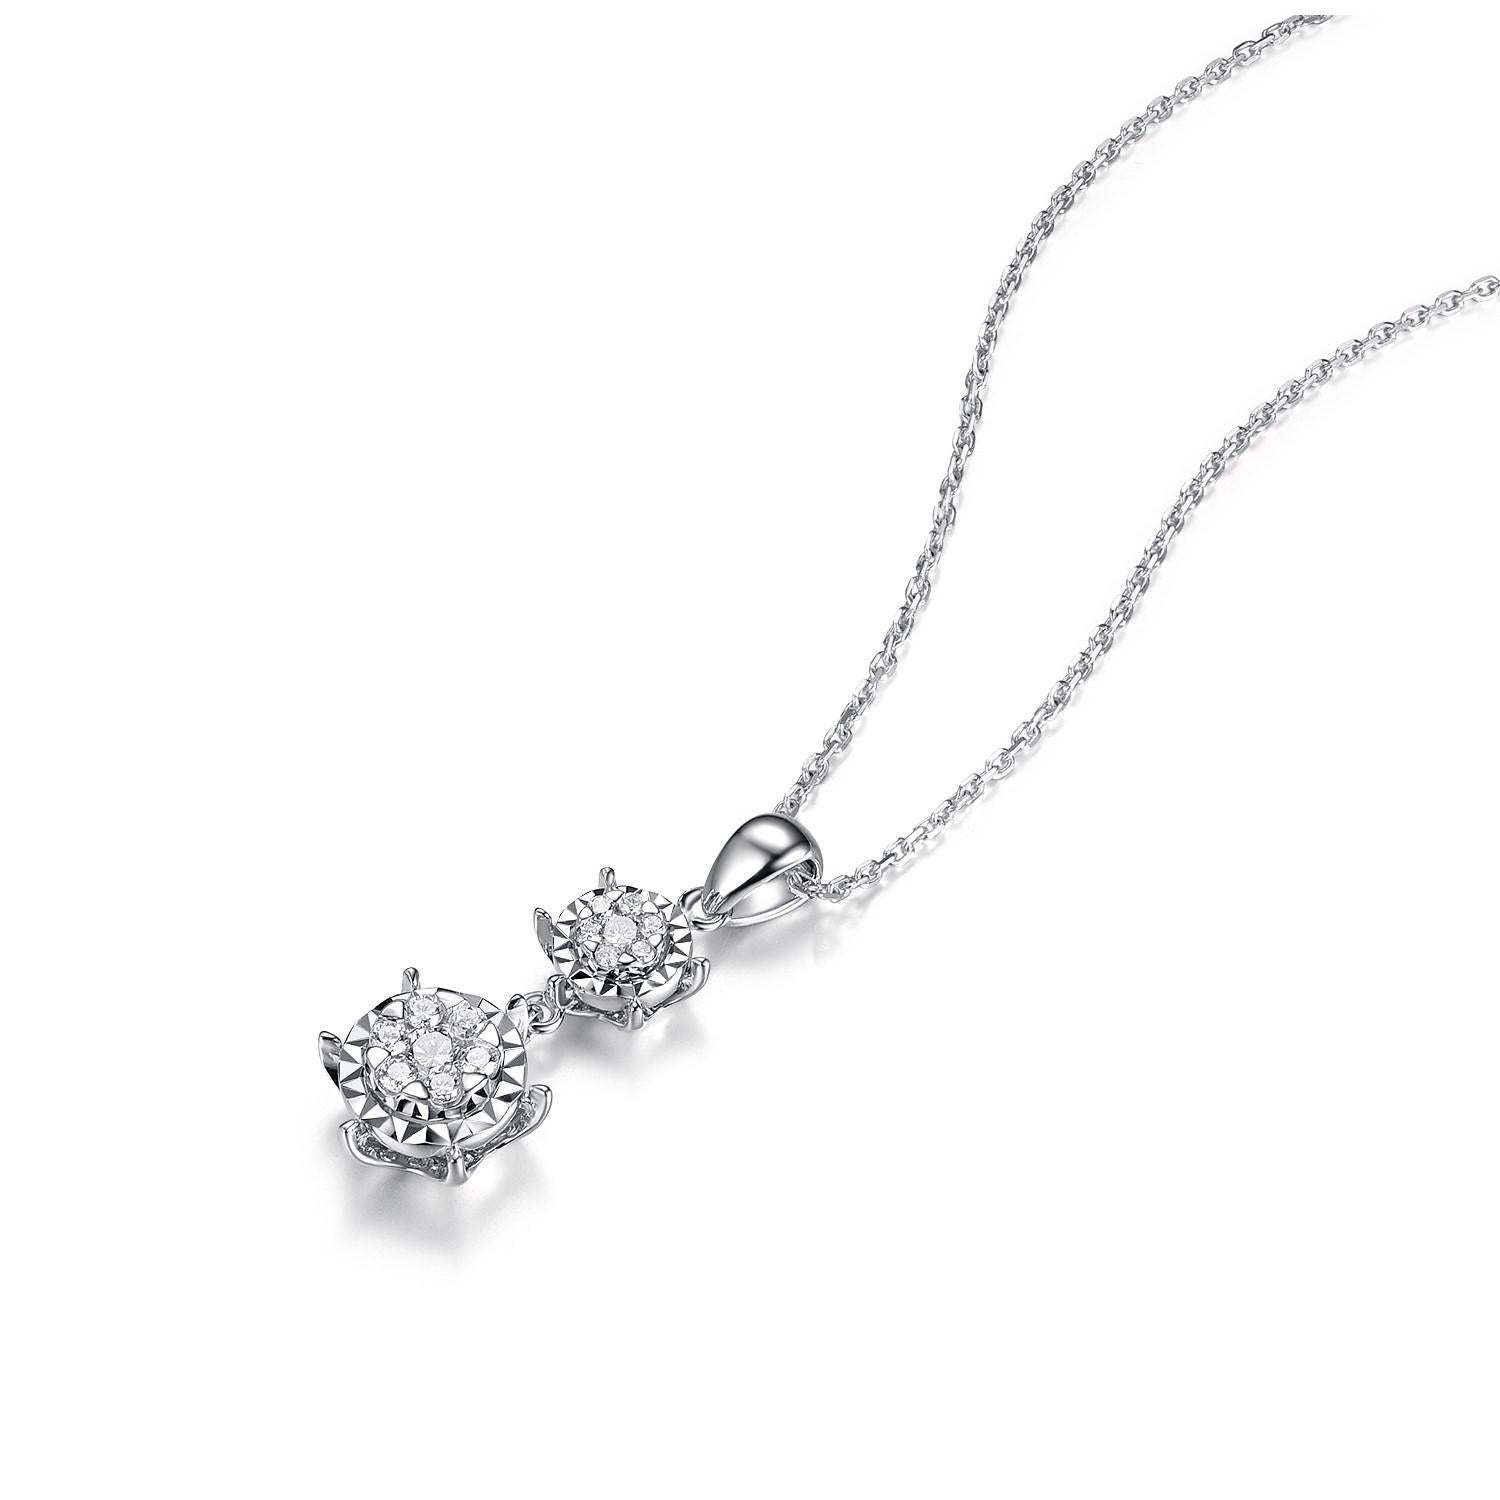 This diamond necklace feature 0.23 carat of round diamonds. Necklace is made with 18 karat white gold.

Round Diamond 0.23 carat
pendant diameter : 5mm &7mm
chain:17inches